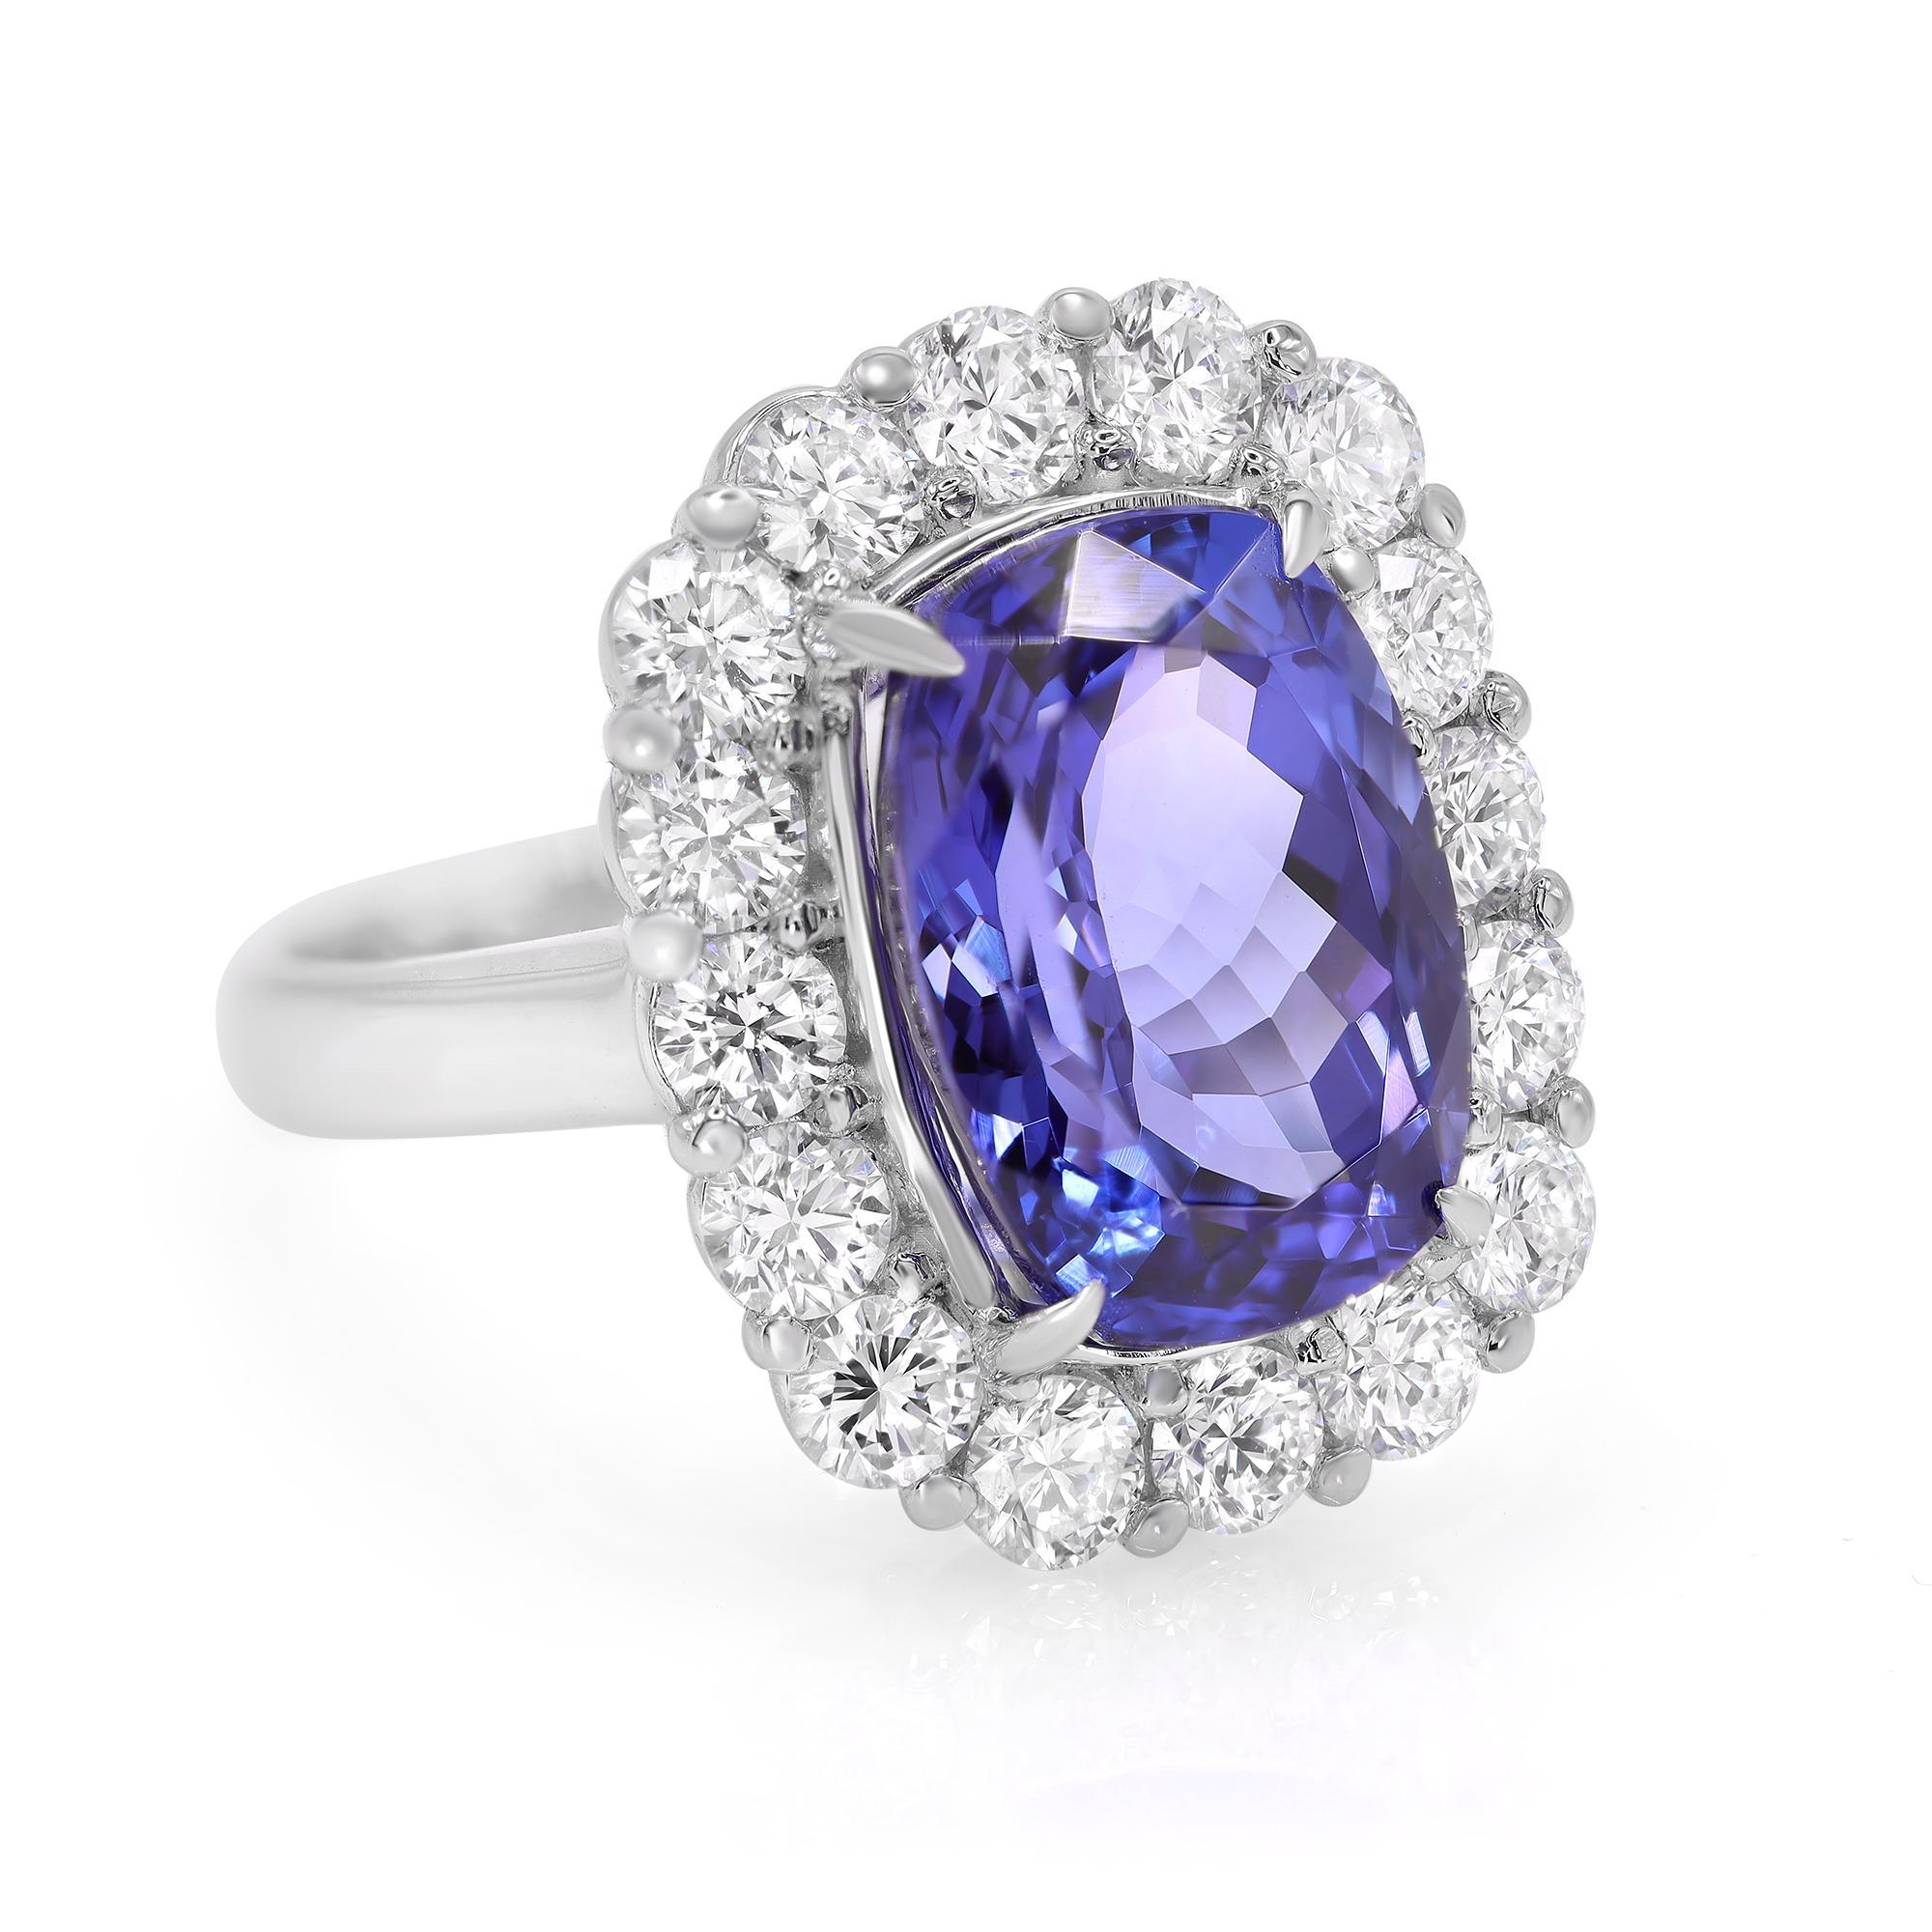 This stunning cocktail ring features top quality natural purple blue cushion cut Tanzanite which is accented with fine round cut diamonds mounted in platinum. The gemstone is rich in color and saturation that glistens from the center. The total